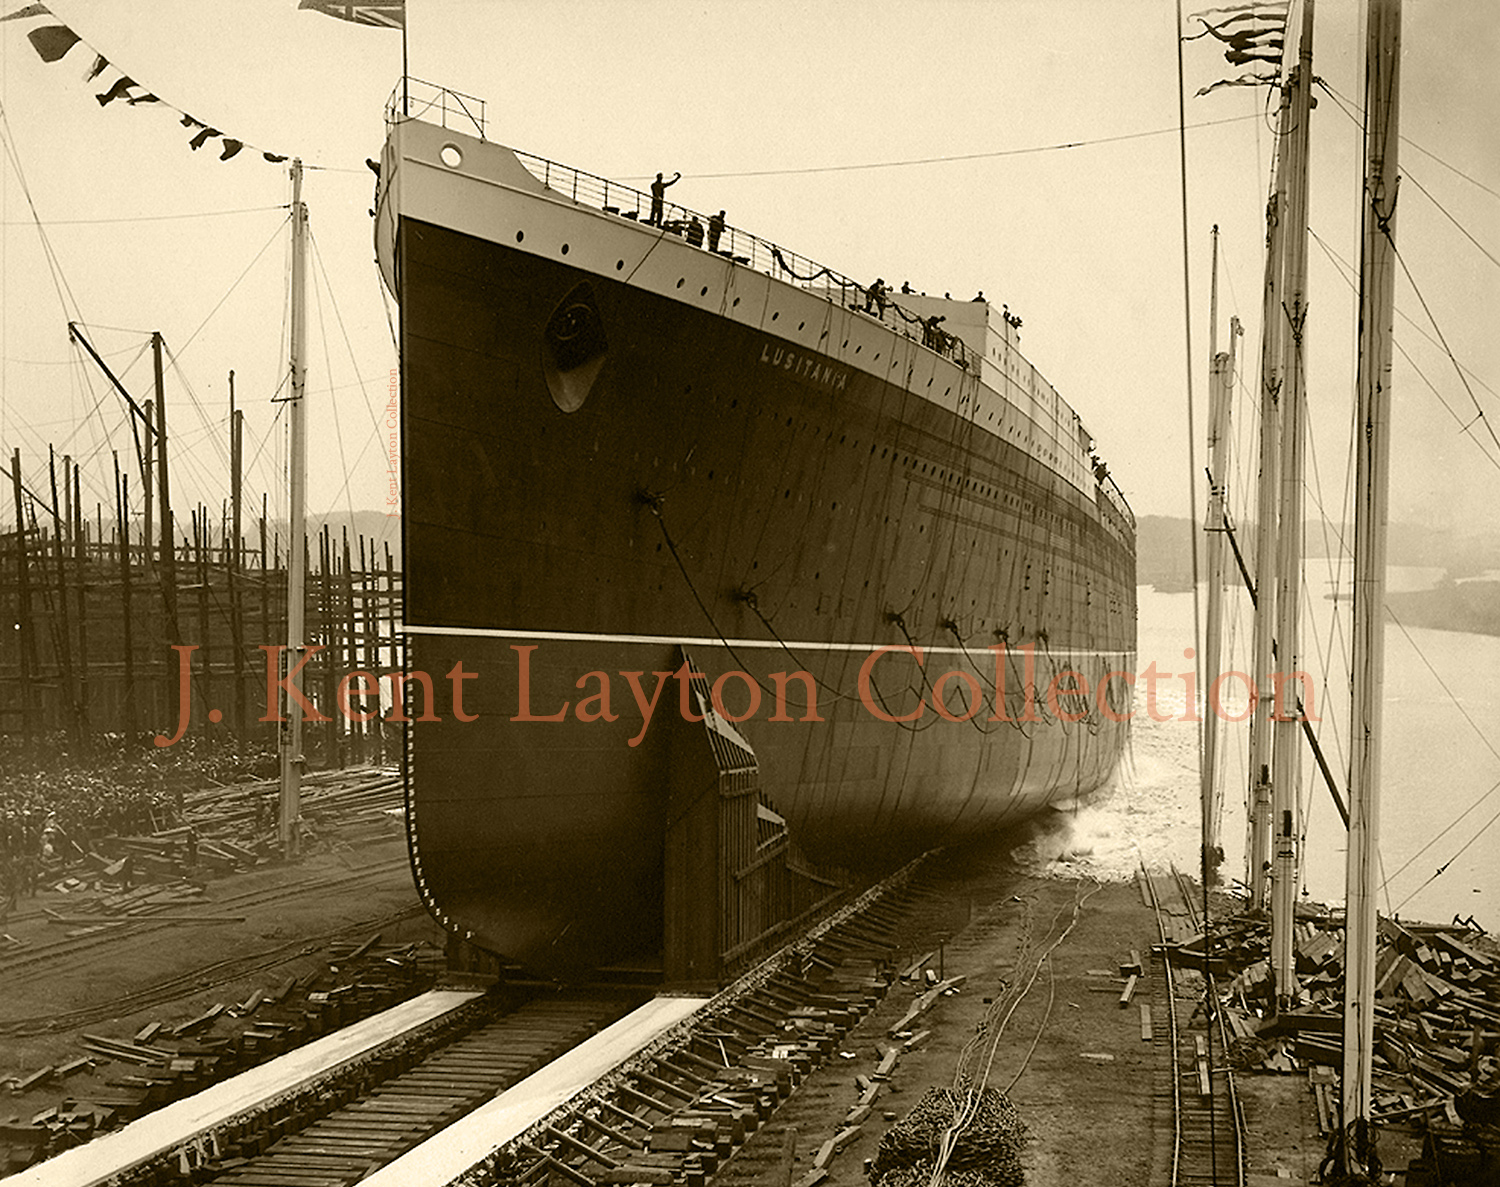 June 7, 1906: The Lusitania is launched. (J. Kent Layton Collection)